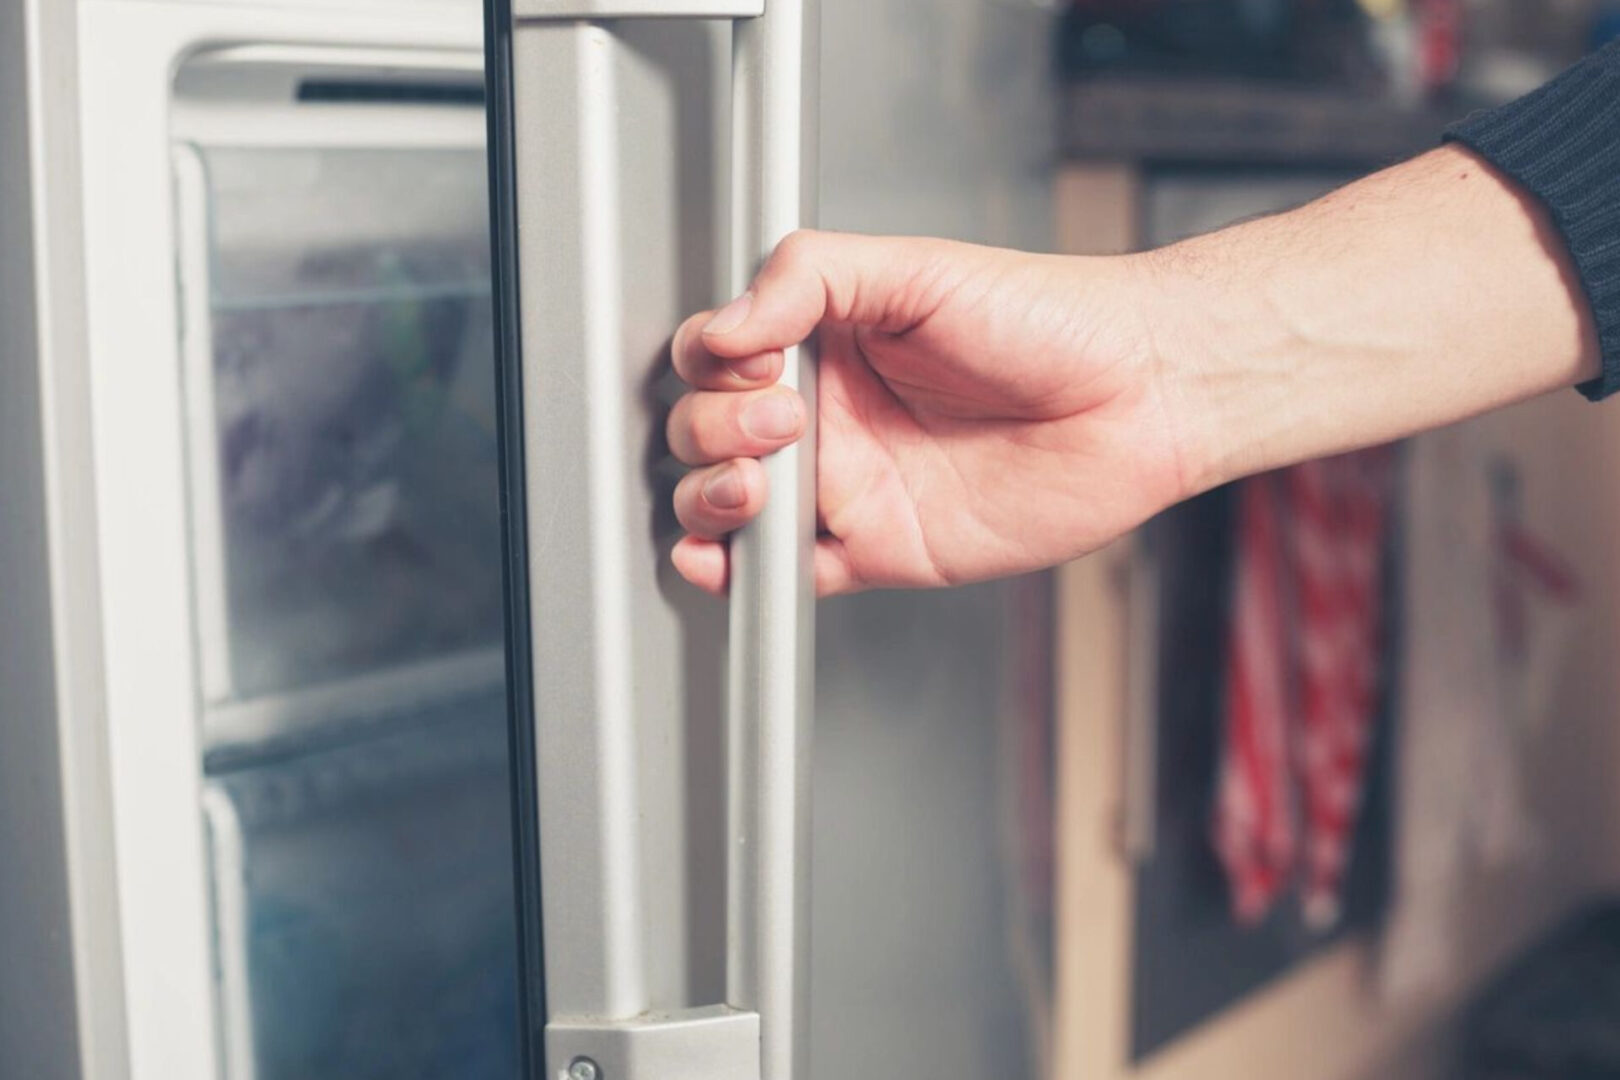 A person opening the door of an oven.